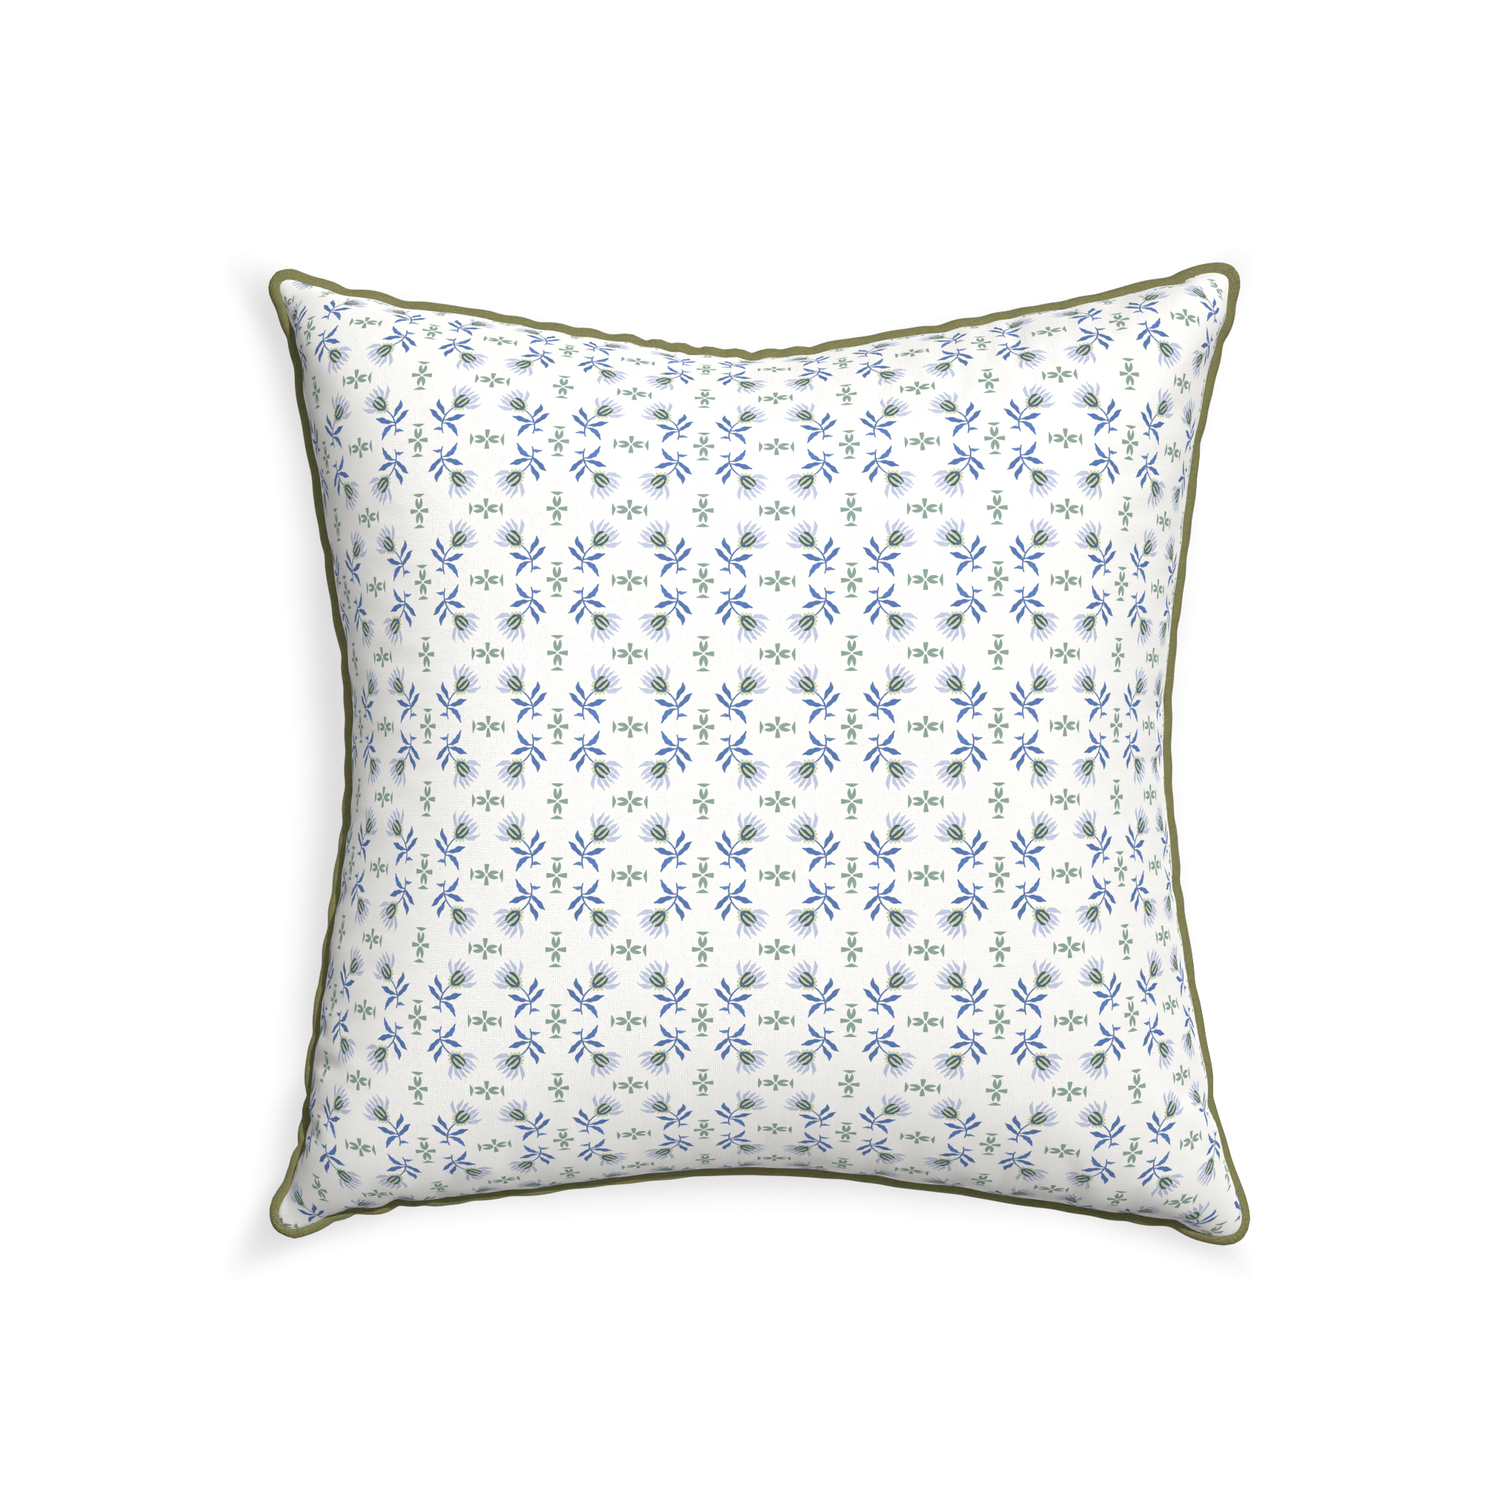 22-square lee custom blue & green floralpillow with moss piping on white background